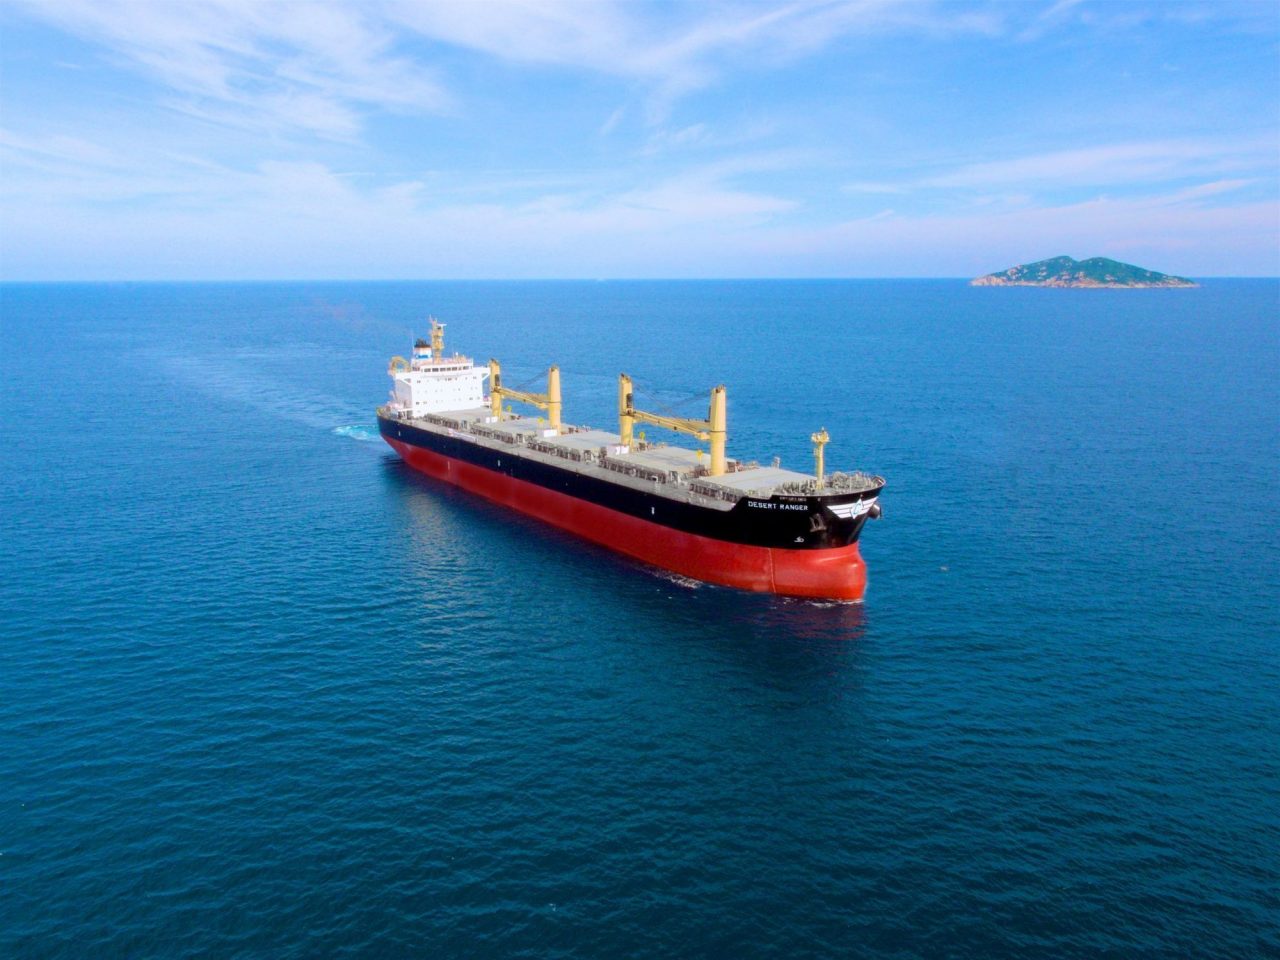 Greek shipowners invested over $ 4.79 billion in ship purchases